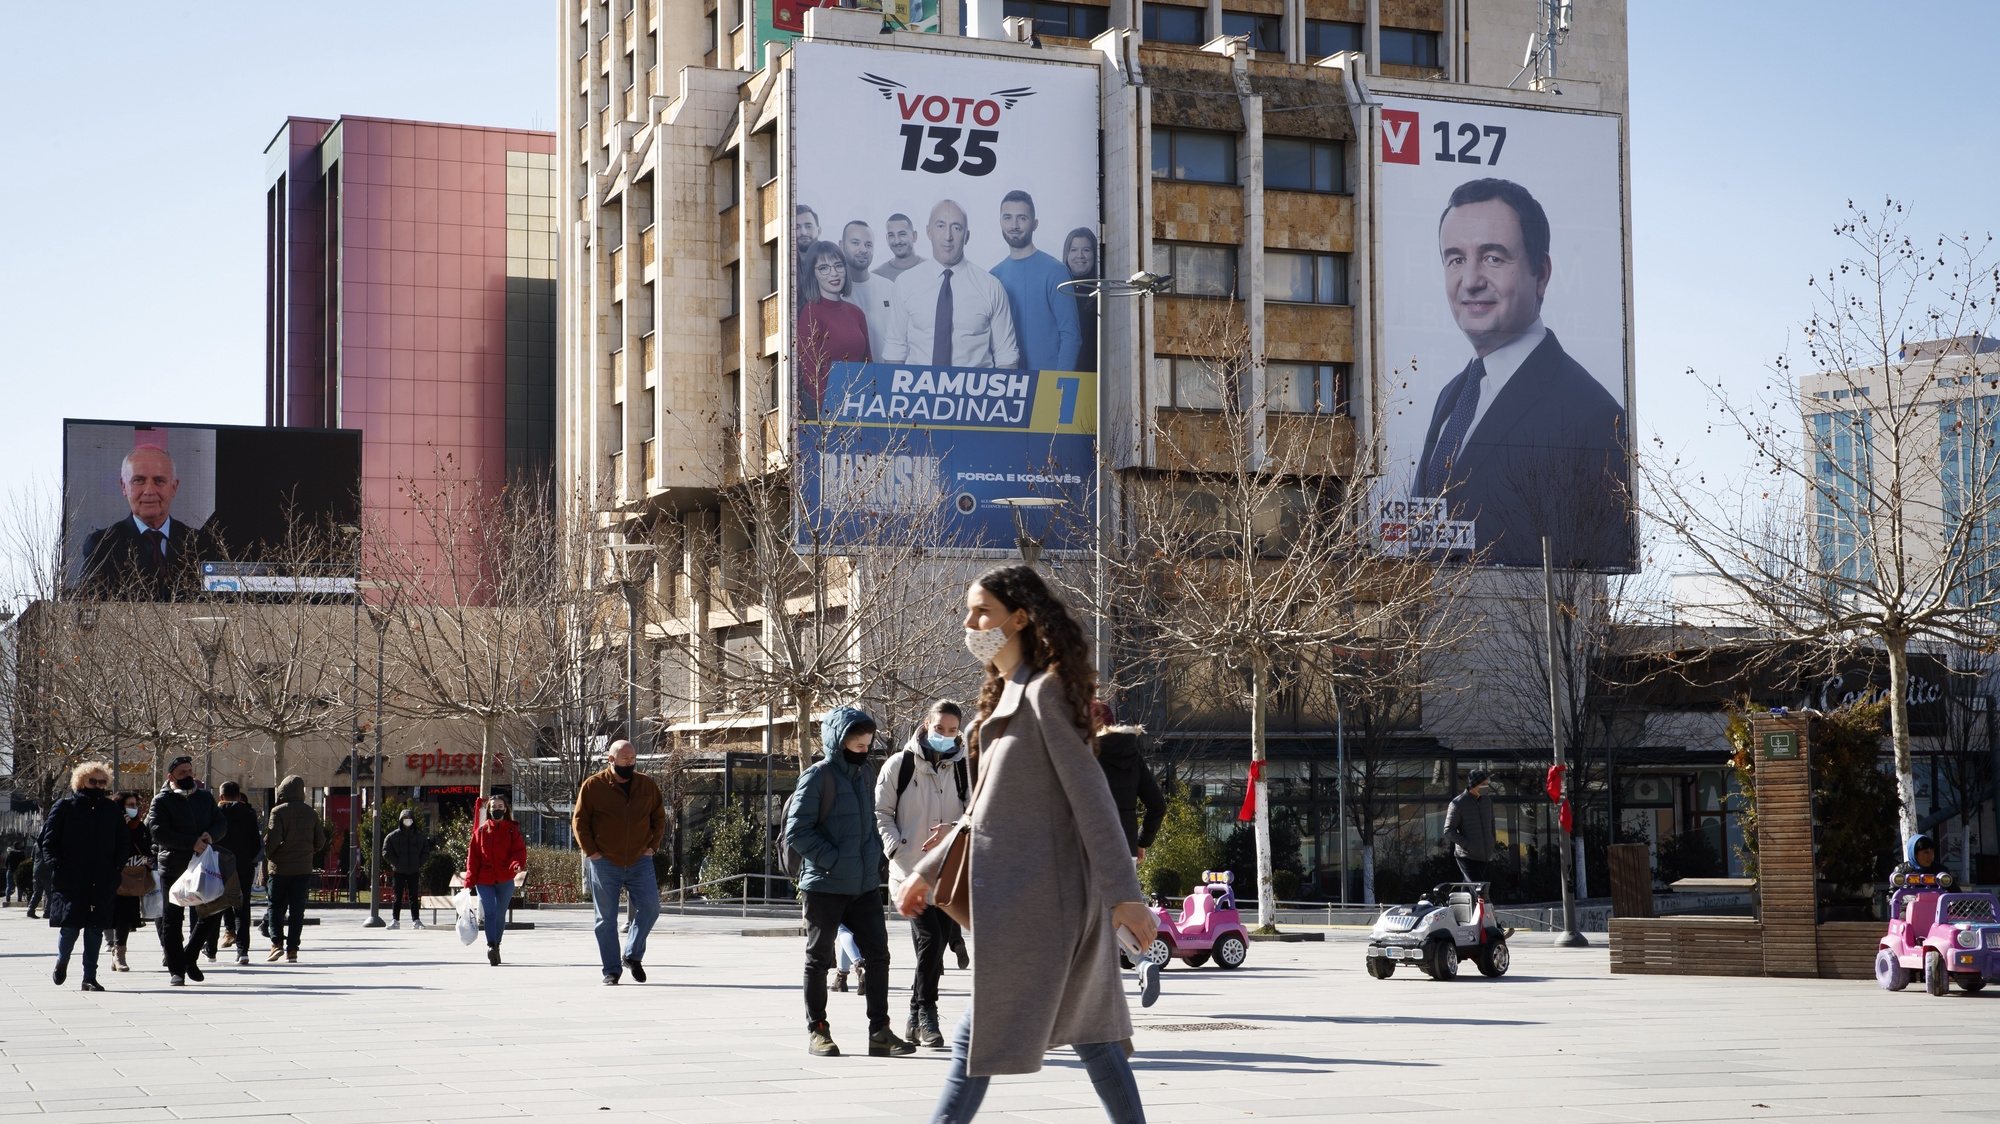 epa09006789 Pedestrians walk in front of the giant electoral posters showing the leader of the movement Self-determination (Vetevendoje) Albin Kurti (R) and leader of the Alliance for the Future of Kosova (AAK) Ramush Haradinaj (L) in Pristina, Kosovo, 12 February 2021. Kosovo&#039;s early parliamentary elections will be held on 14 February 2021.  EPA/VALDRIN XHEMAJ